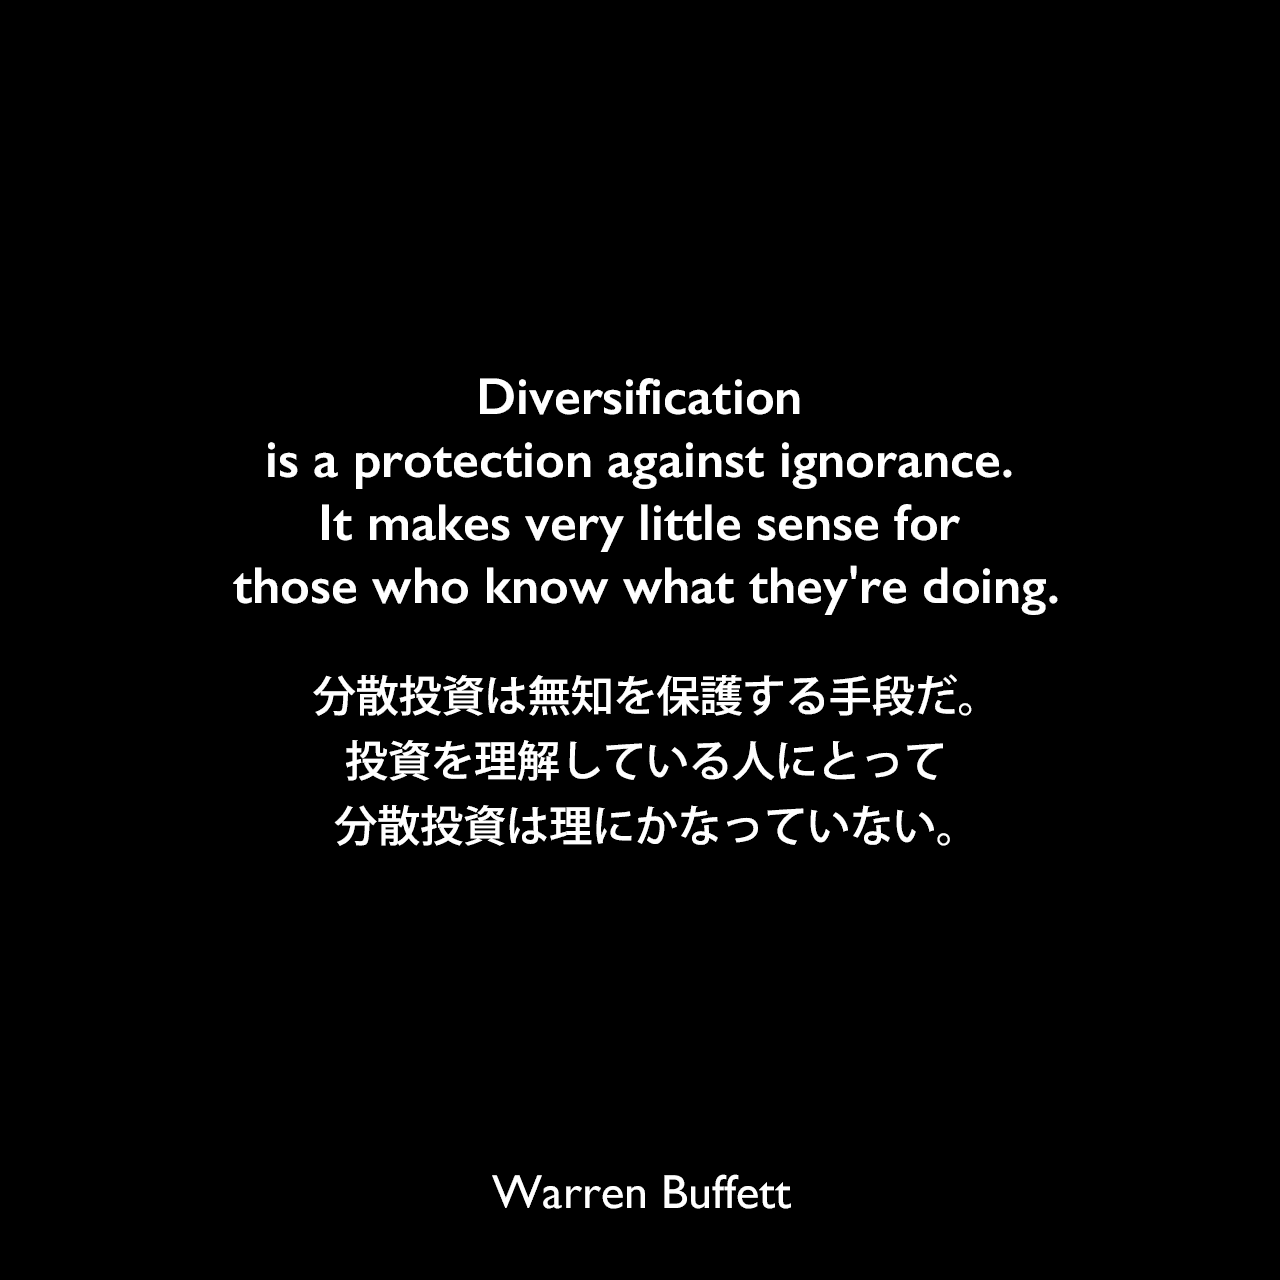 Diversification is a protection against ignorance. It makes very little sense for those who know what they're doing.分散投資は無知を保護する手段だ。投資を理解している人にとって、分散投資は理にかなっていない。Warren Buffett